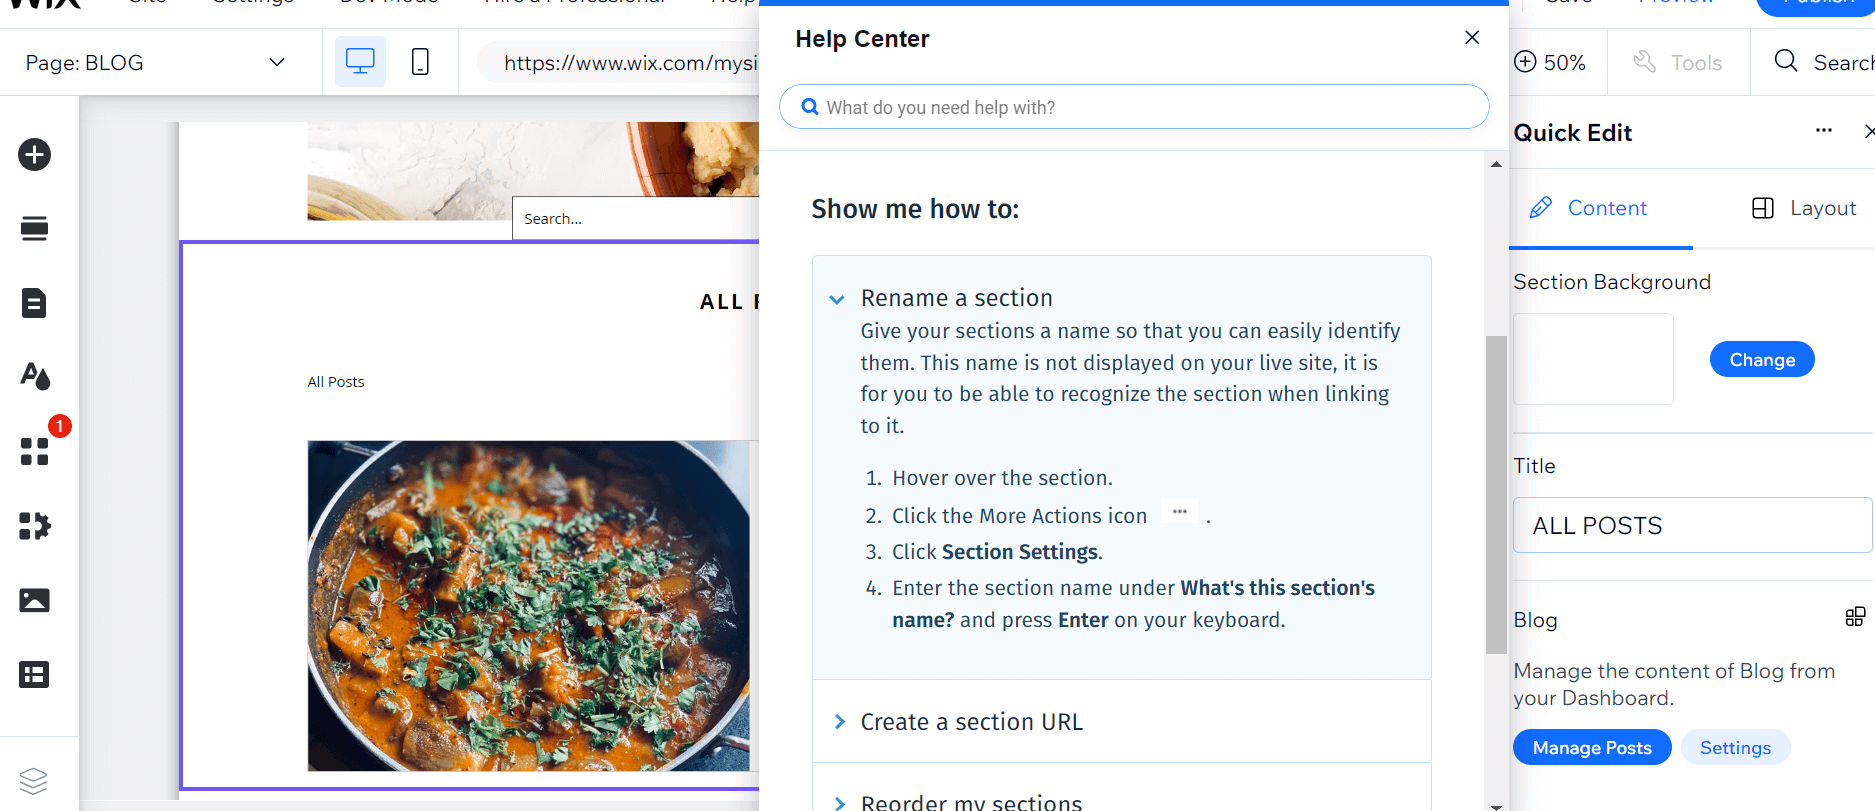 Wix Help center popup that shows when a user clicks on a question mark symbol